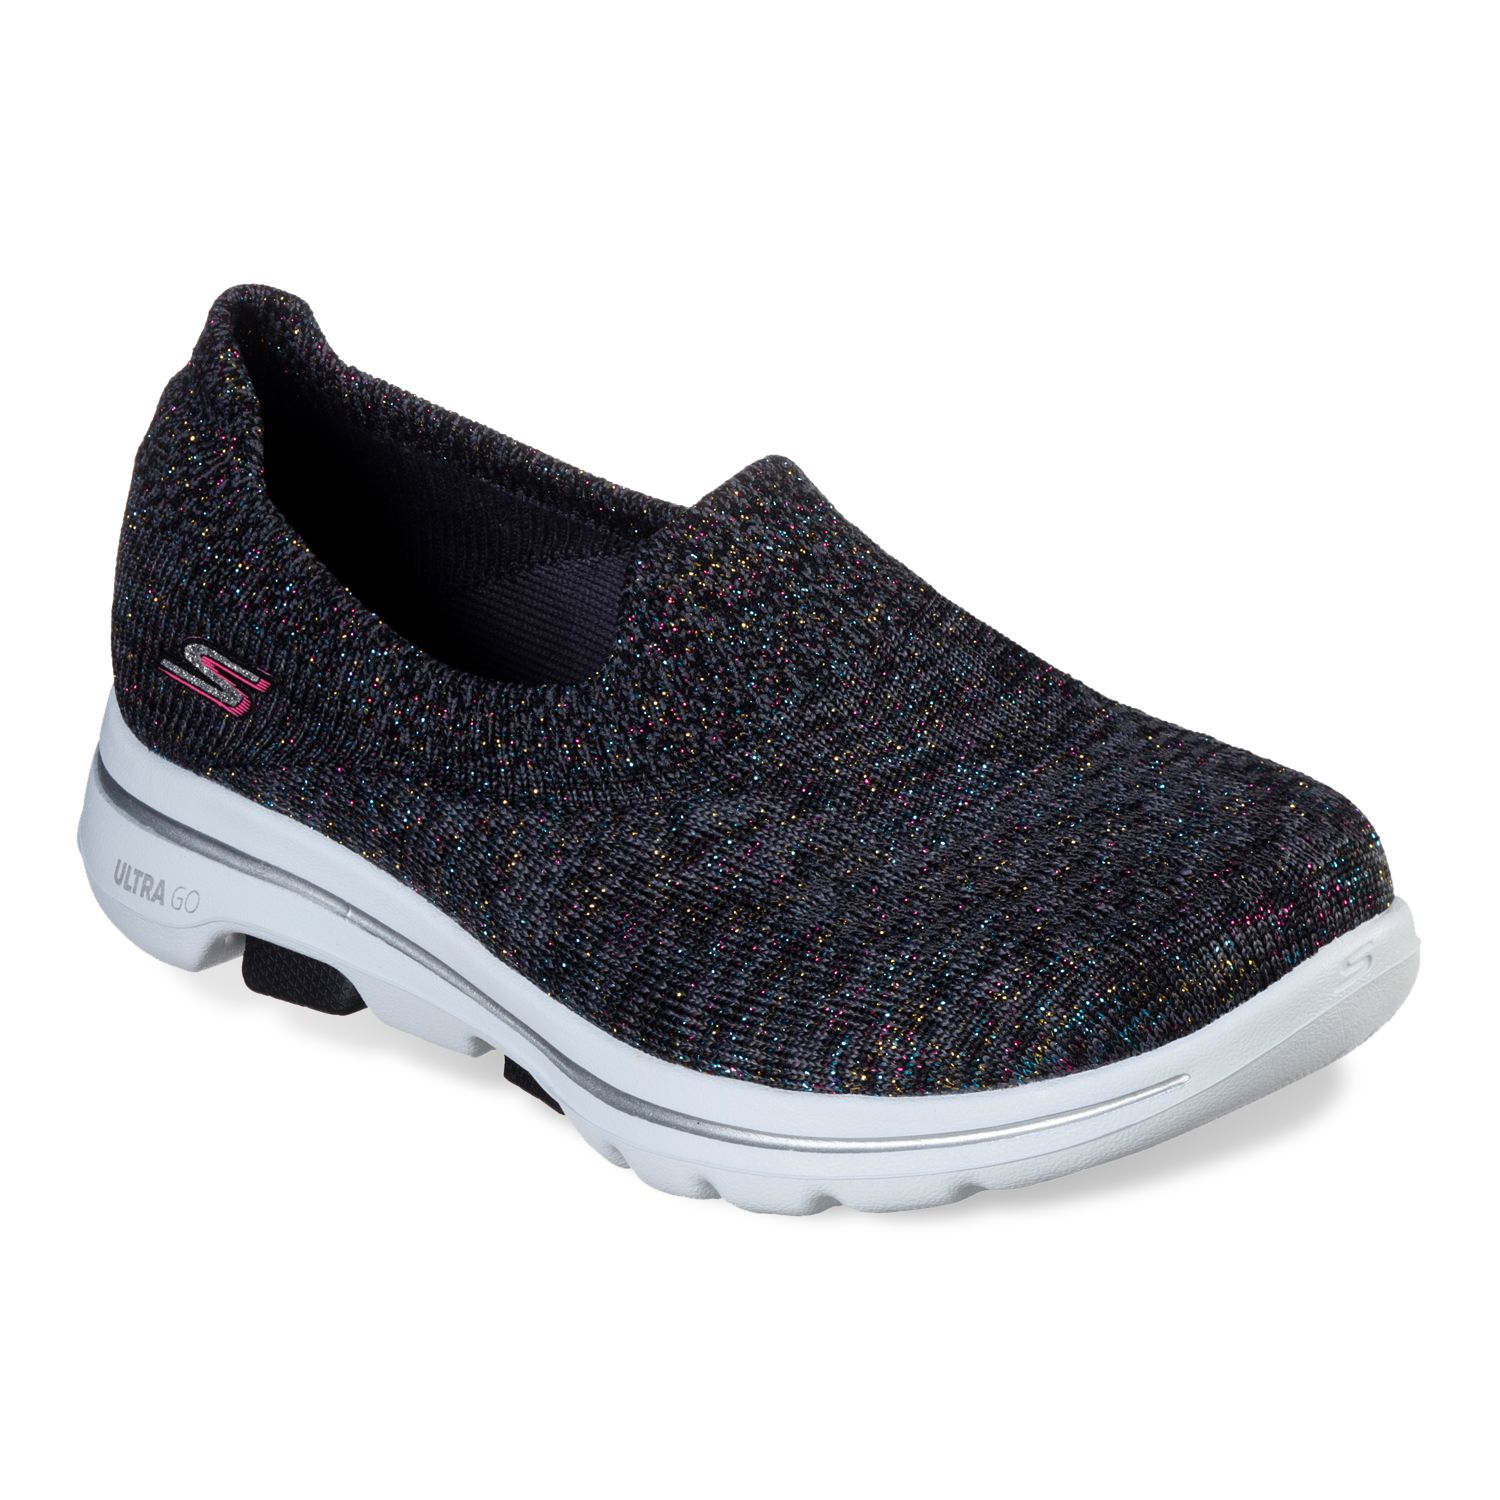 skechers go walk leather and mesh